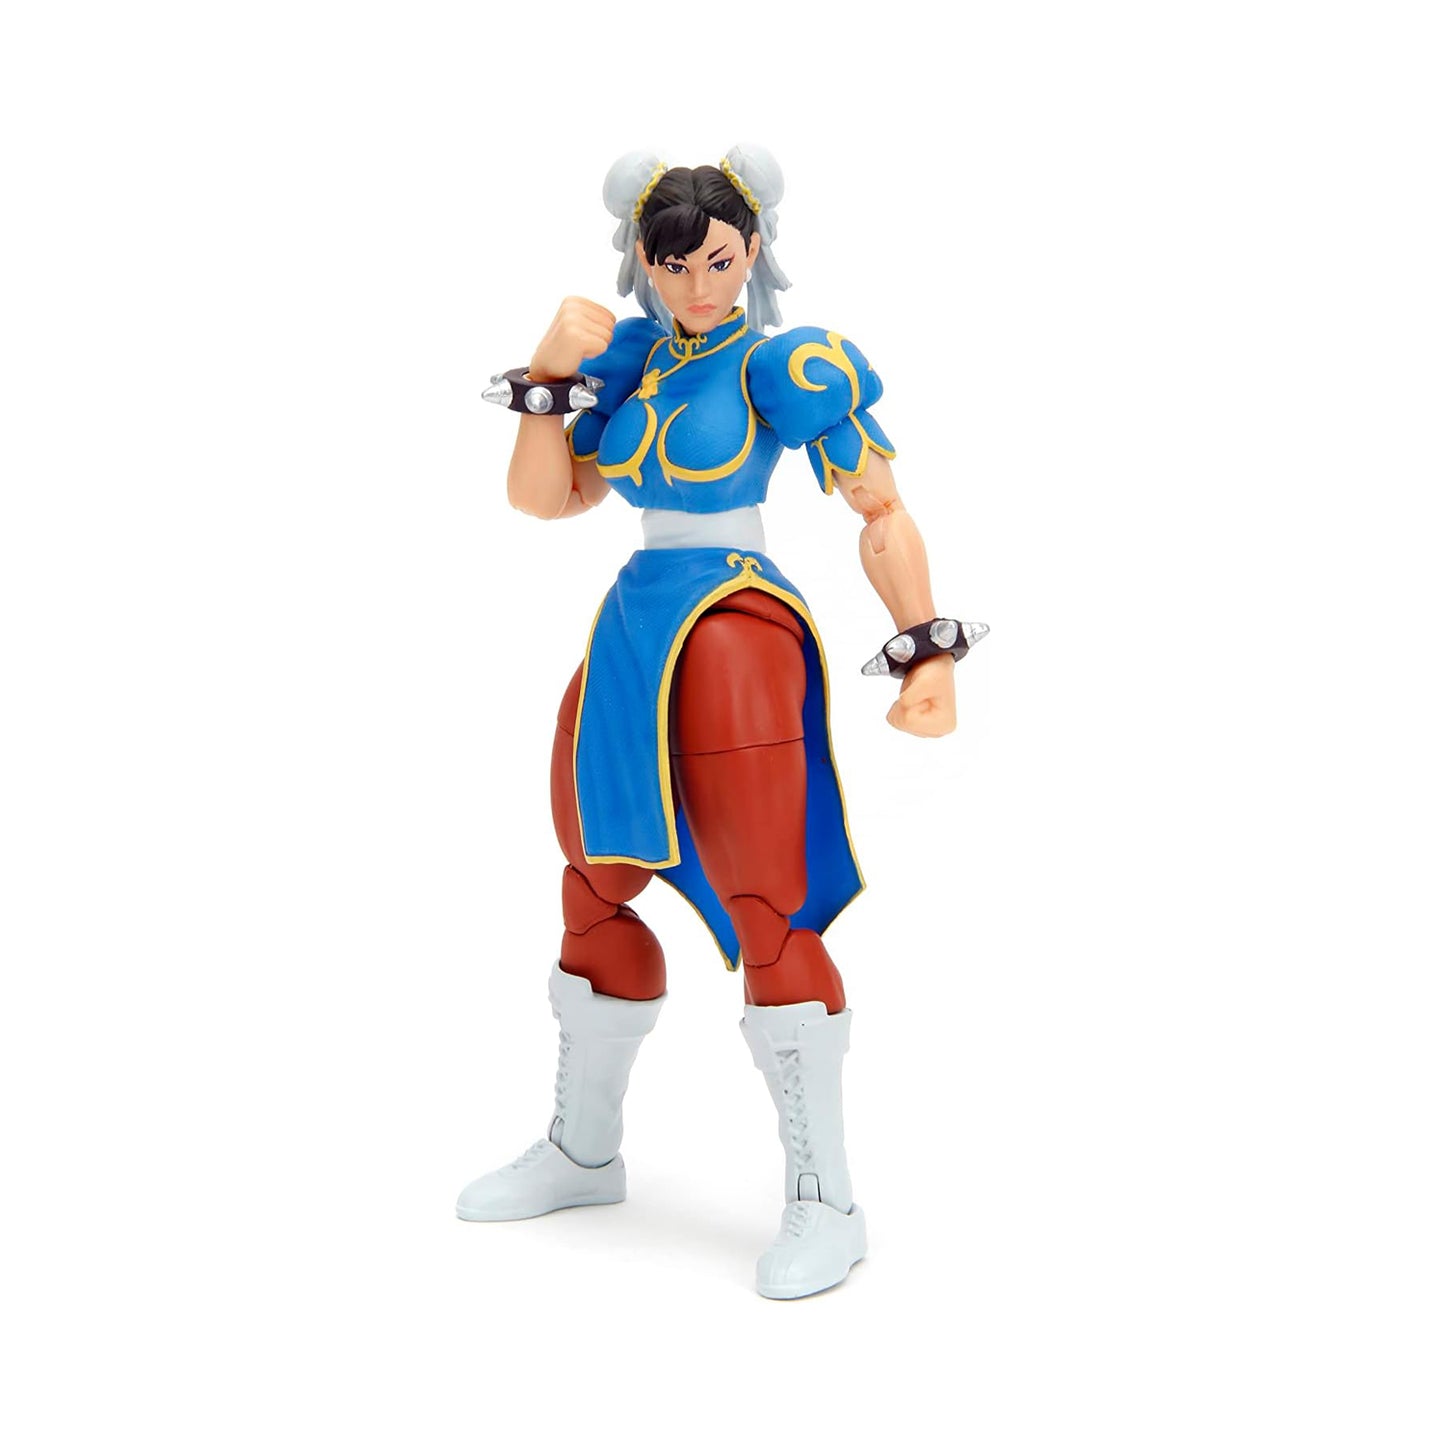 Chun-Li 6-Inch Action Figure from Street Fighter II: The Final Challengers